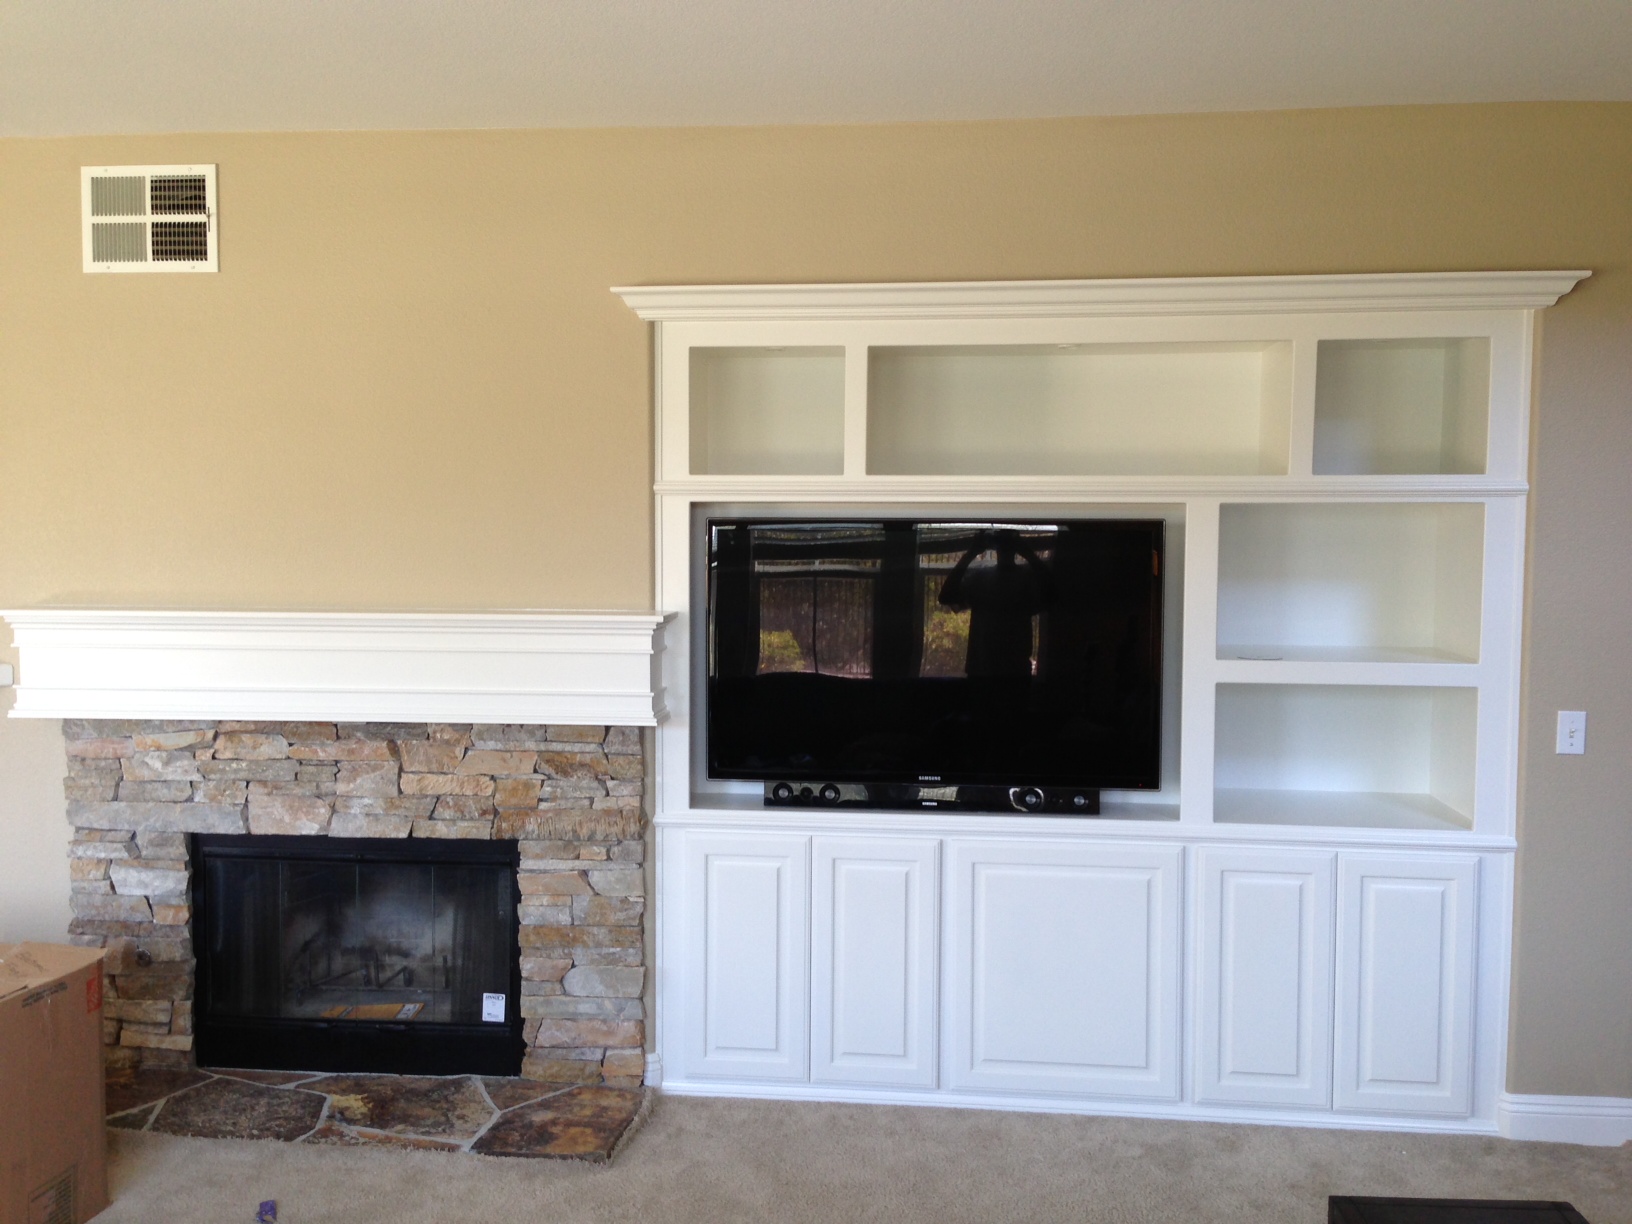 Wall Unit Entertainment Center with Fireplace Lovely Verfuhrerisch Tv Wall Mount Entertainment Centers Plans